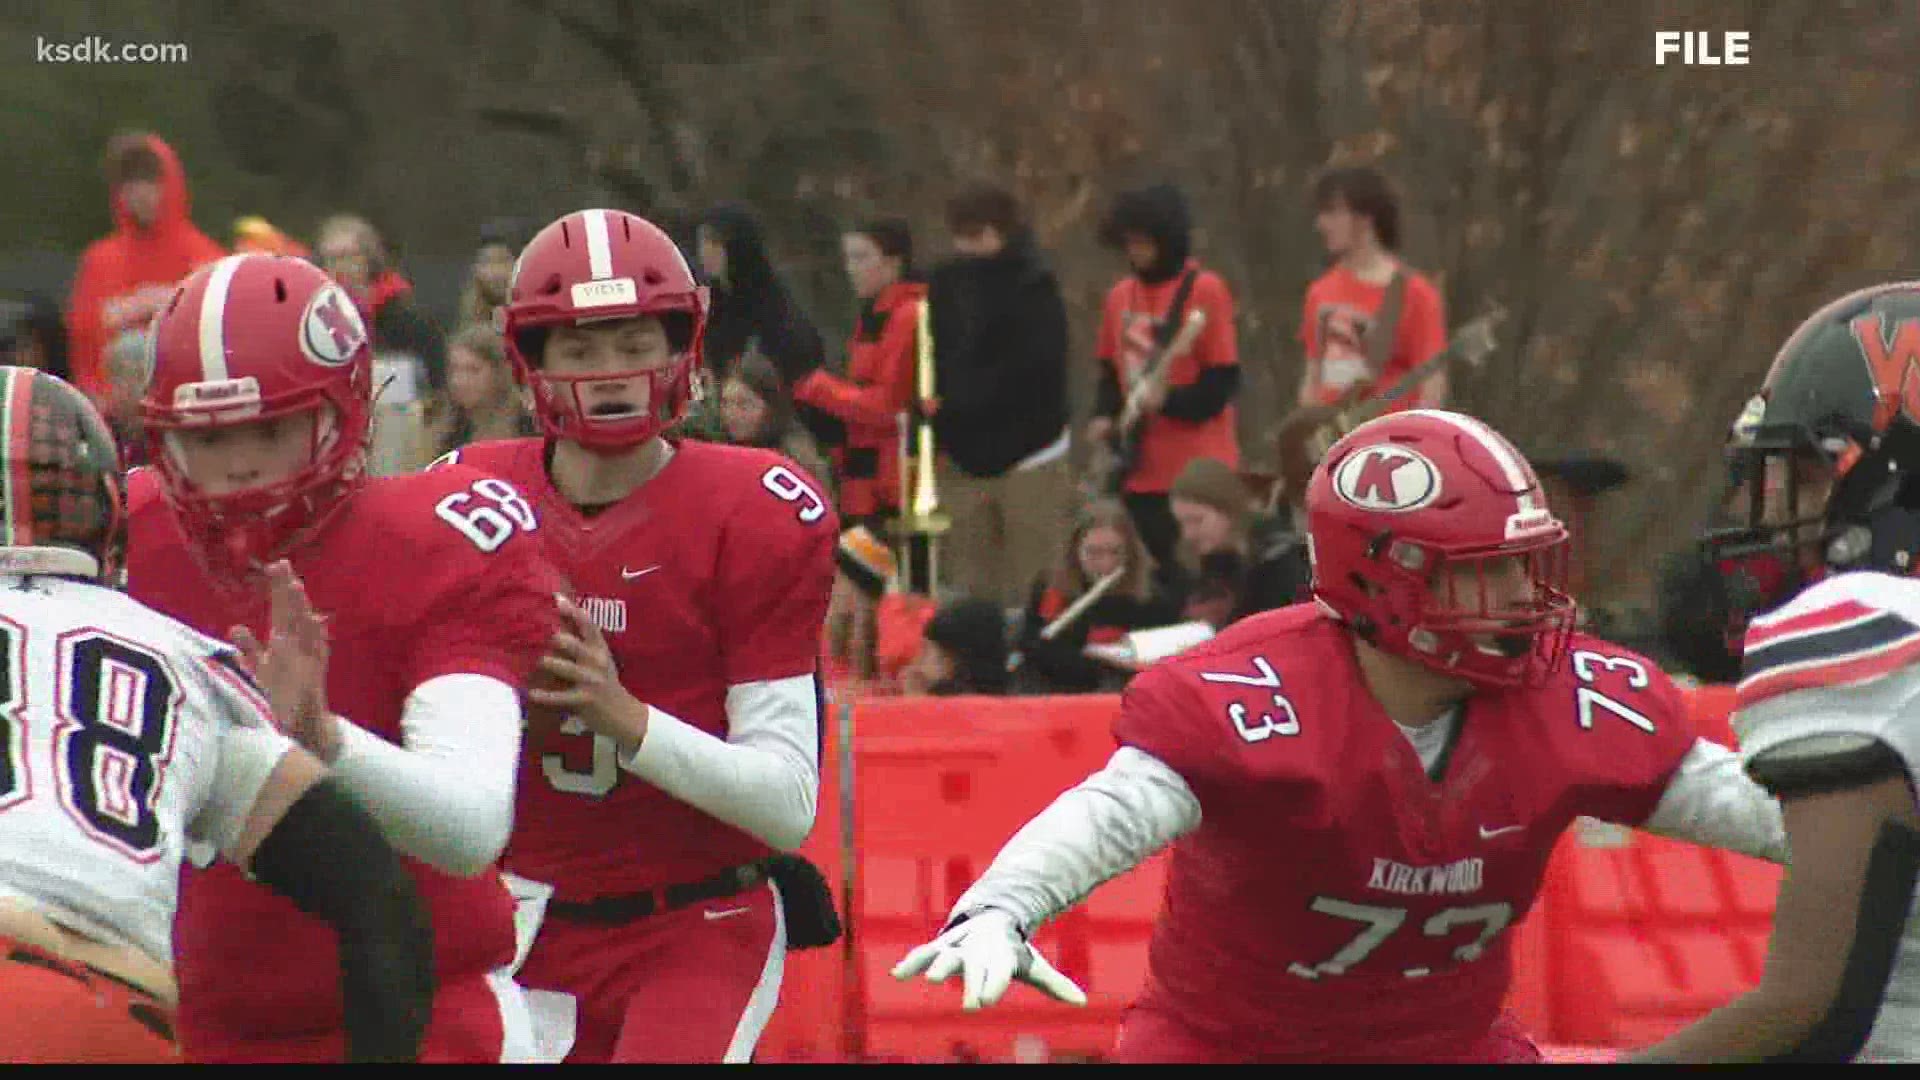 The Pioneers were set to play SLUH in the first round of the playoffs Friday night until the COVID-19 cancellation